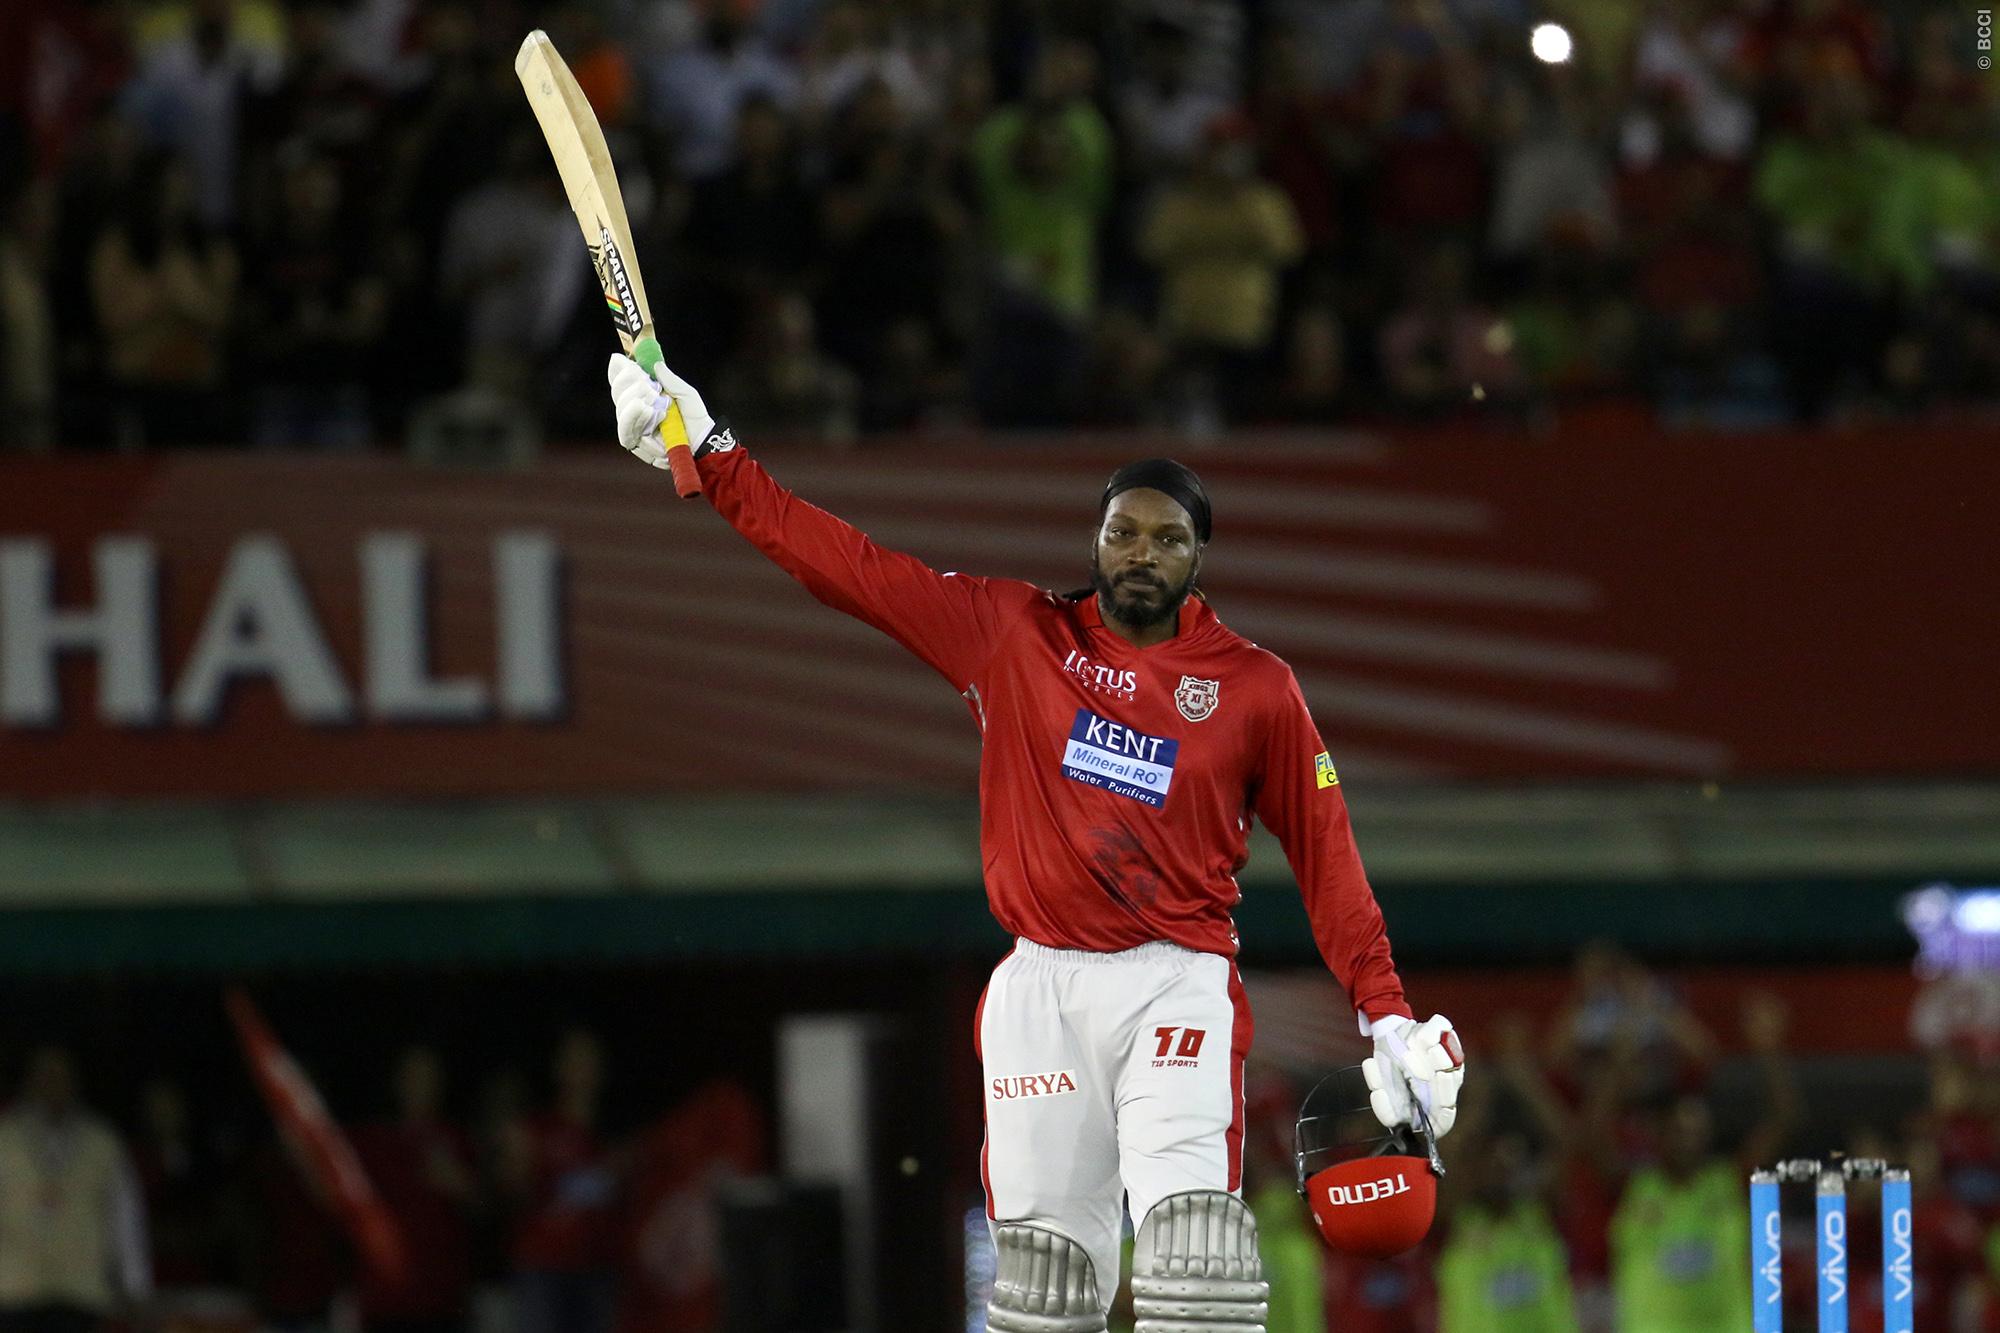 IPL 2018 | Brad Hodge reveals that picking Chris Gayle was not a pre-planned decision